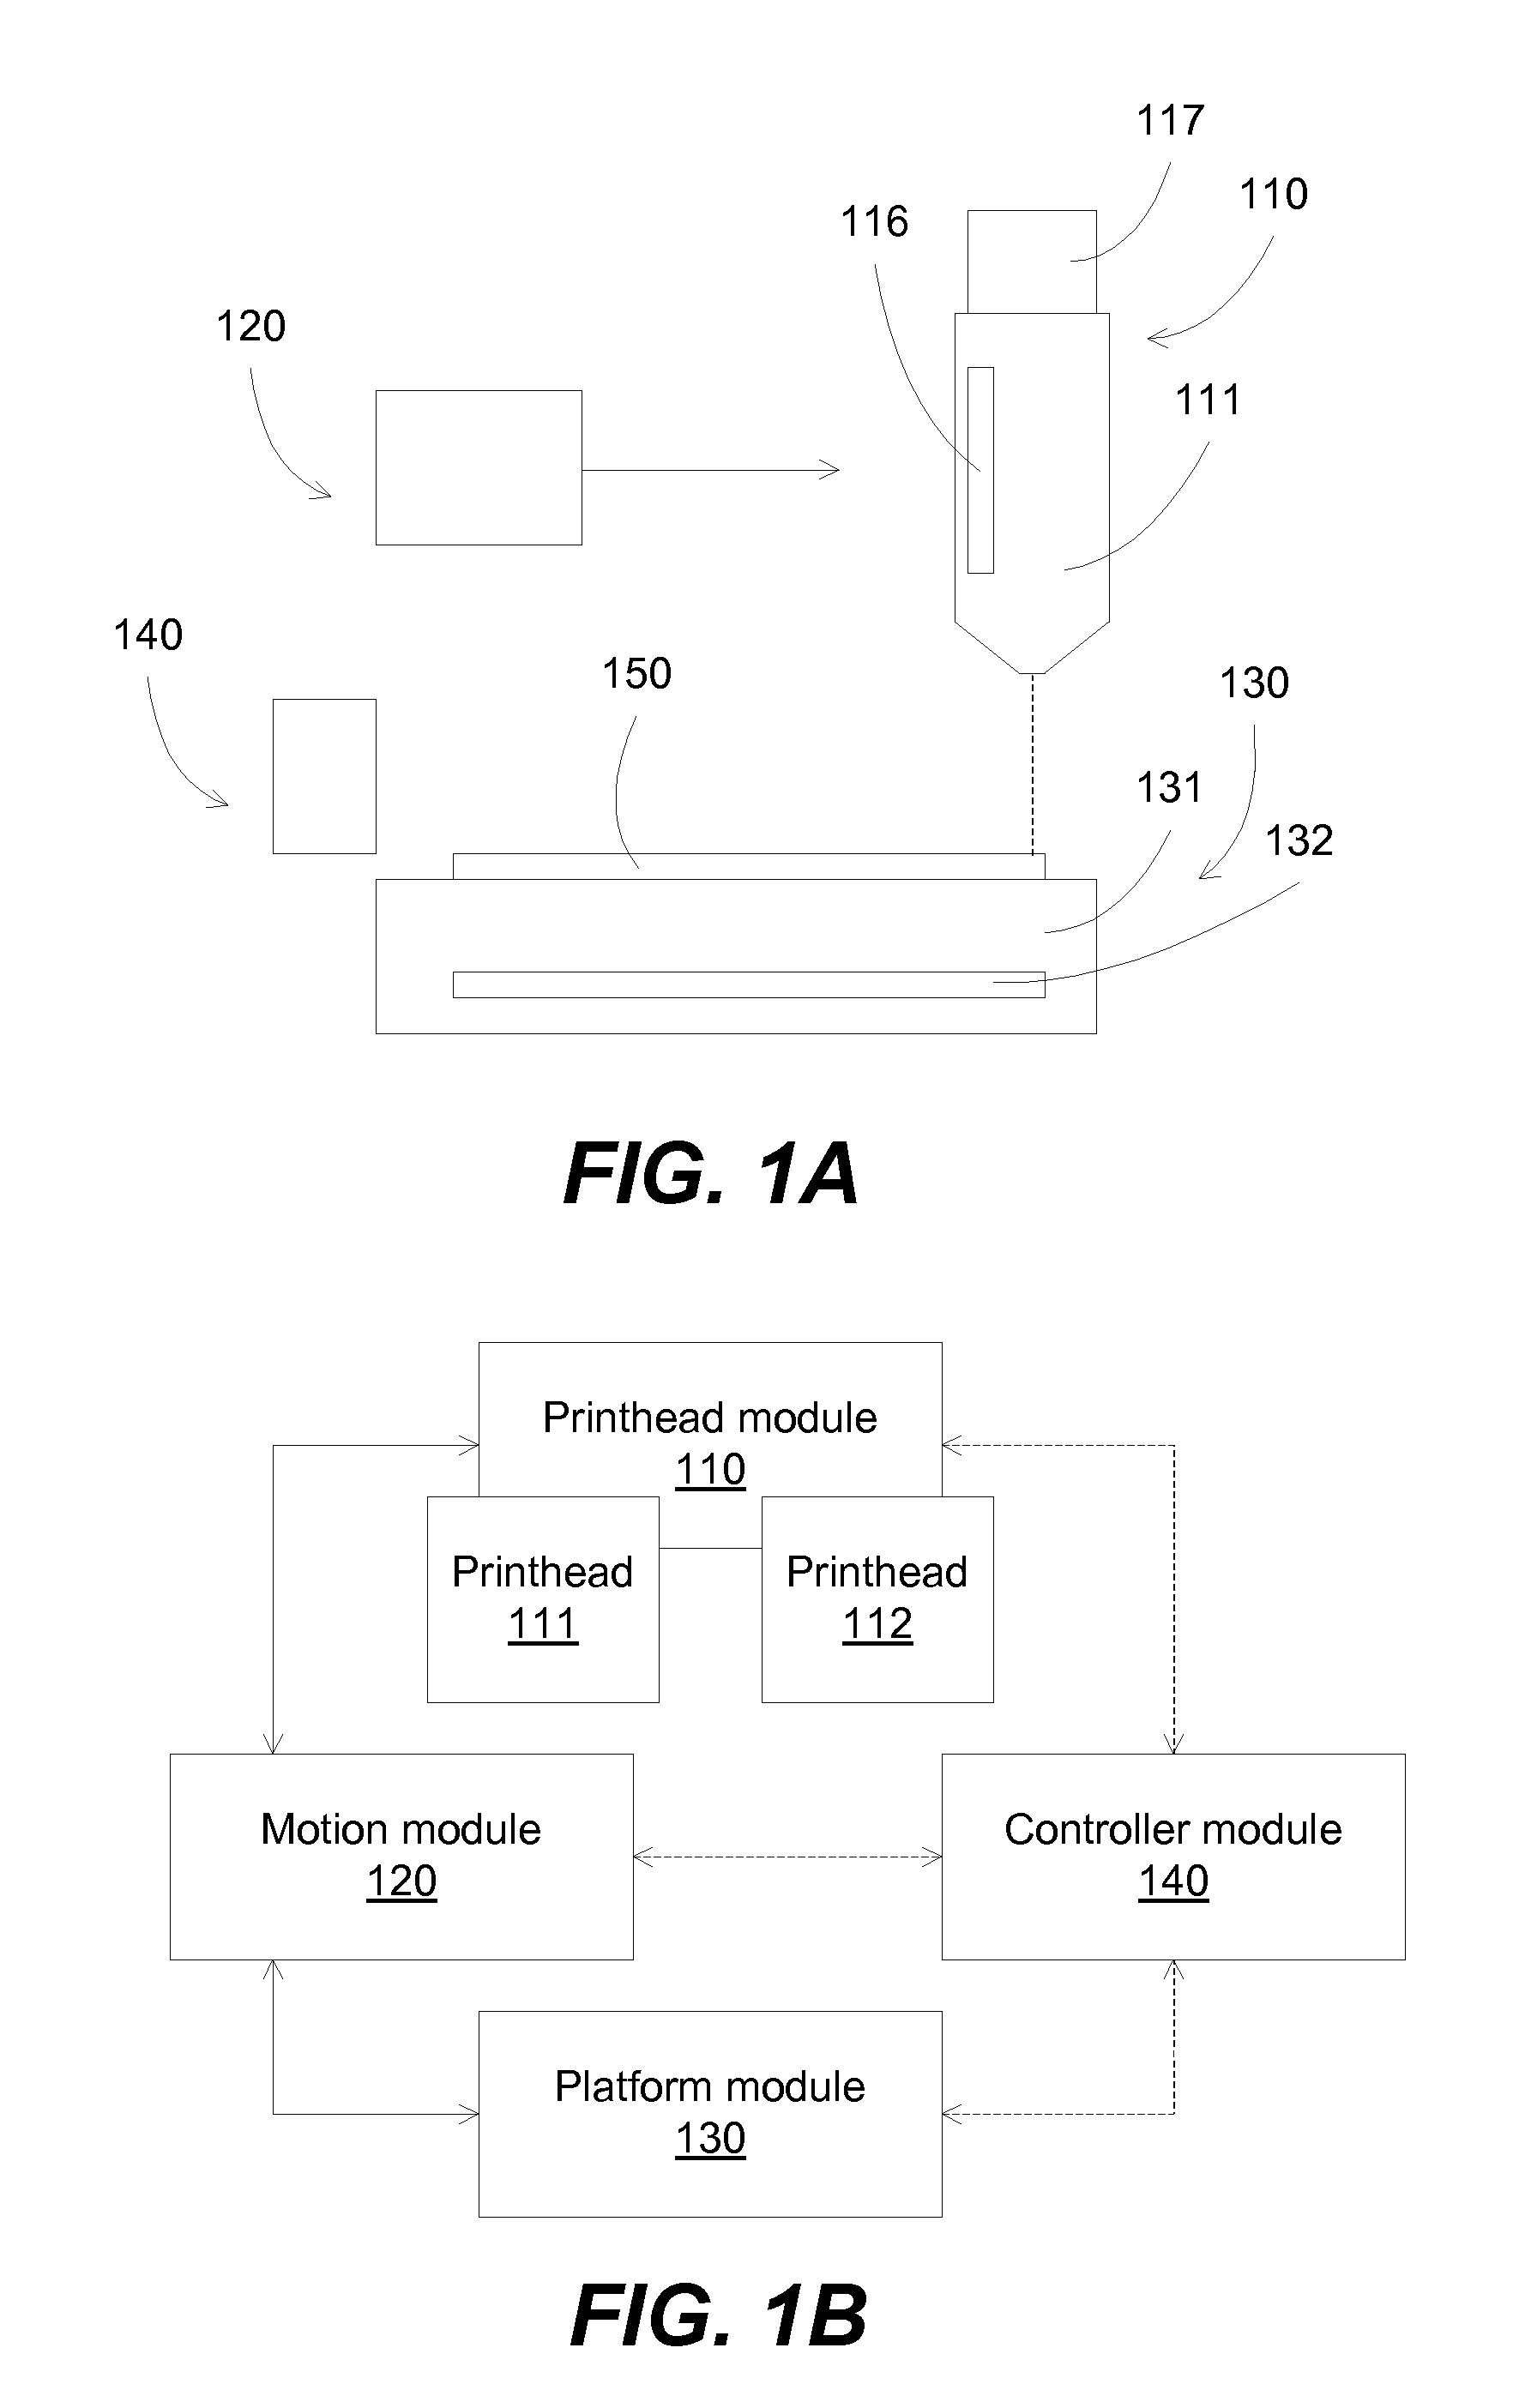 Systems and methods for 3D printing with multiple exchangeable printheads